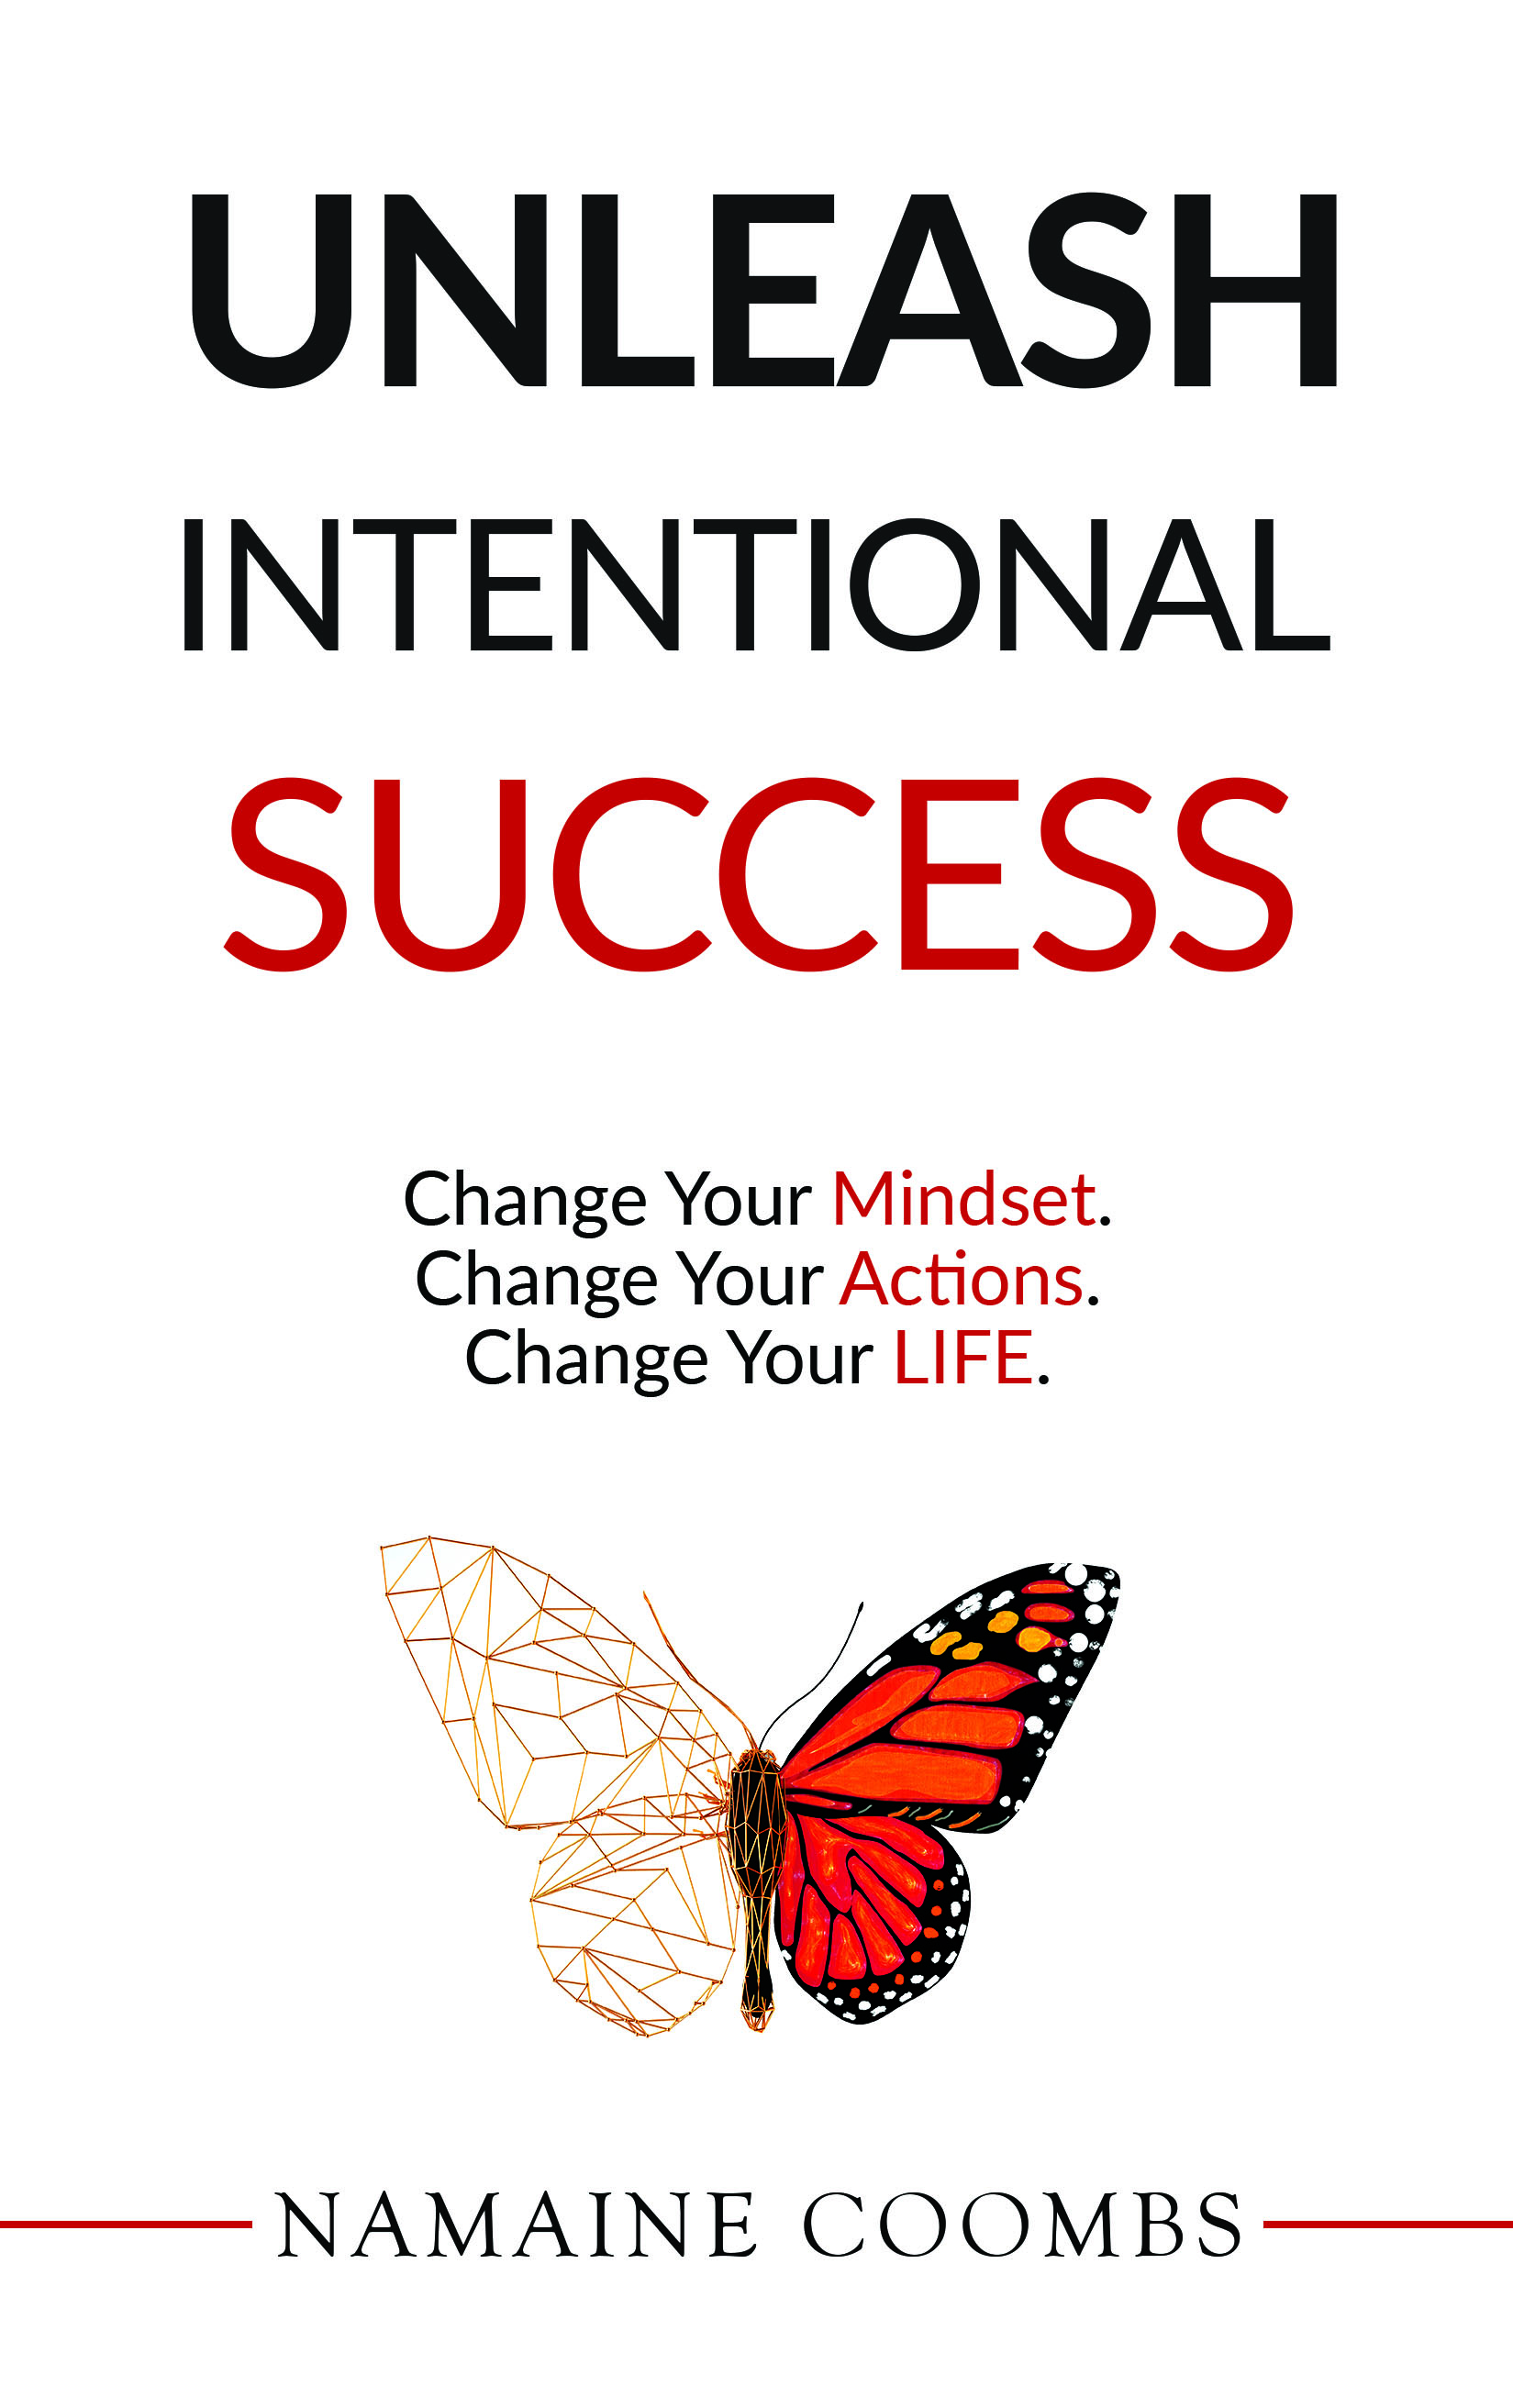 Magnificent Life Publishing Announces "Unleash Intentional Success," a Non-Fiction Self-Help Book by Namaine Coombs